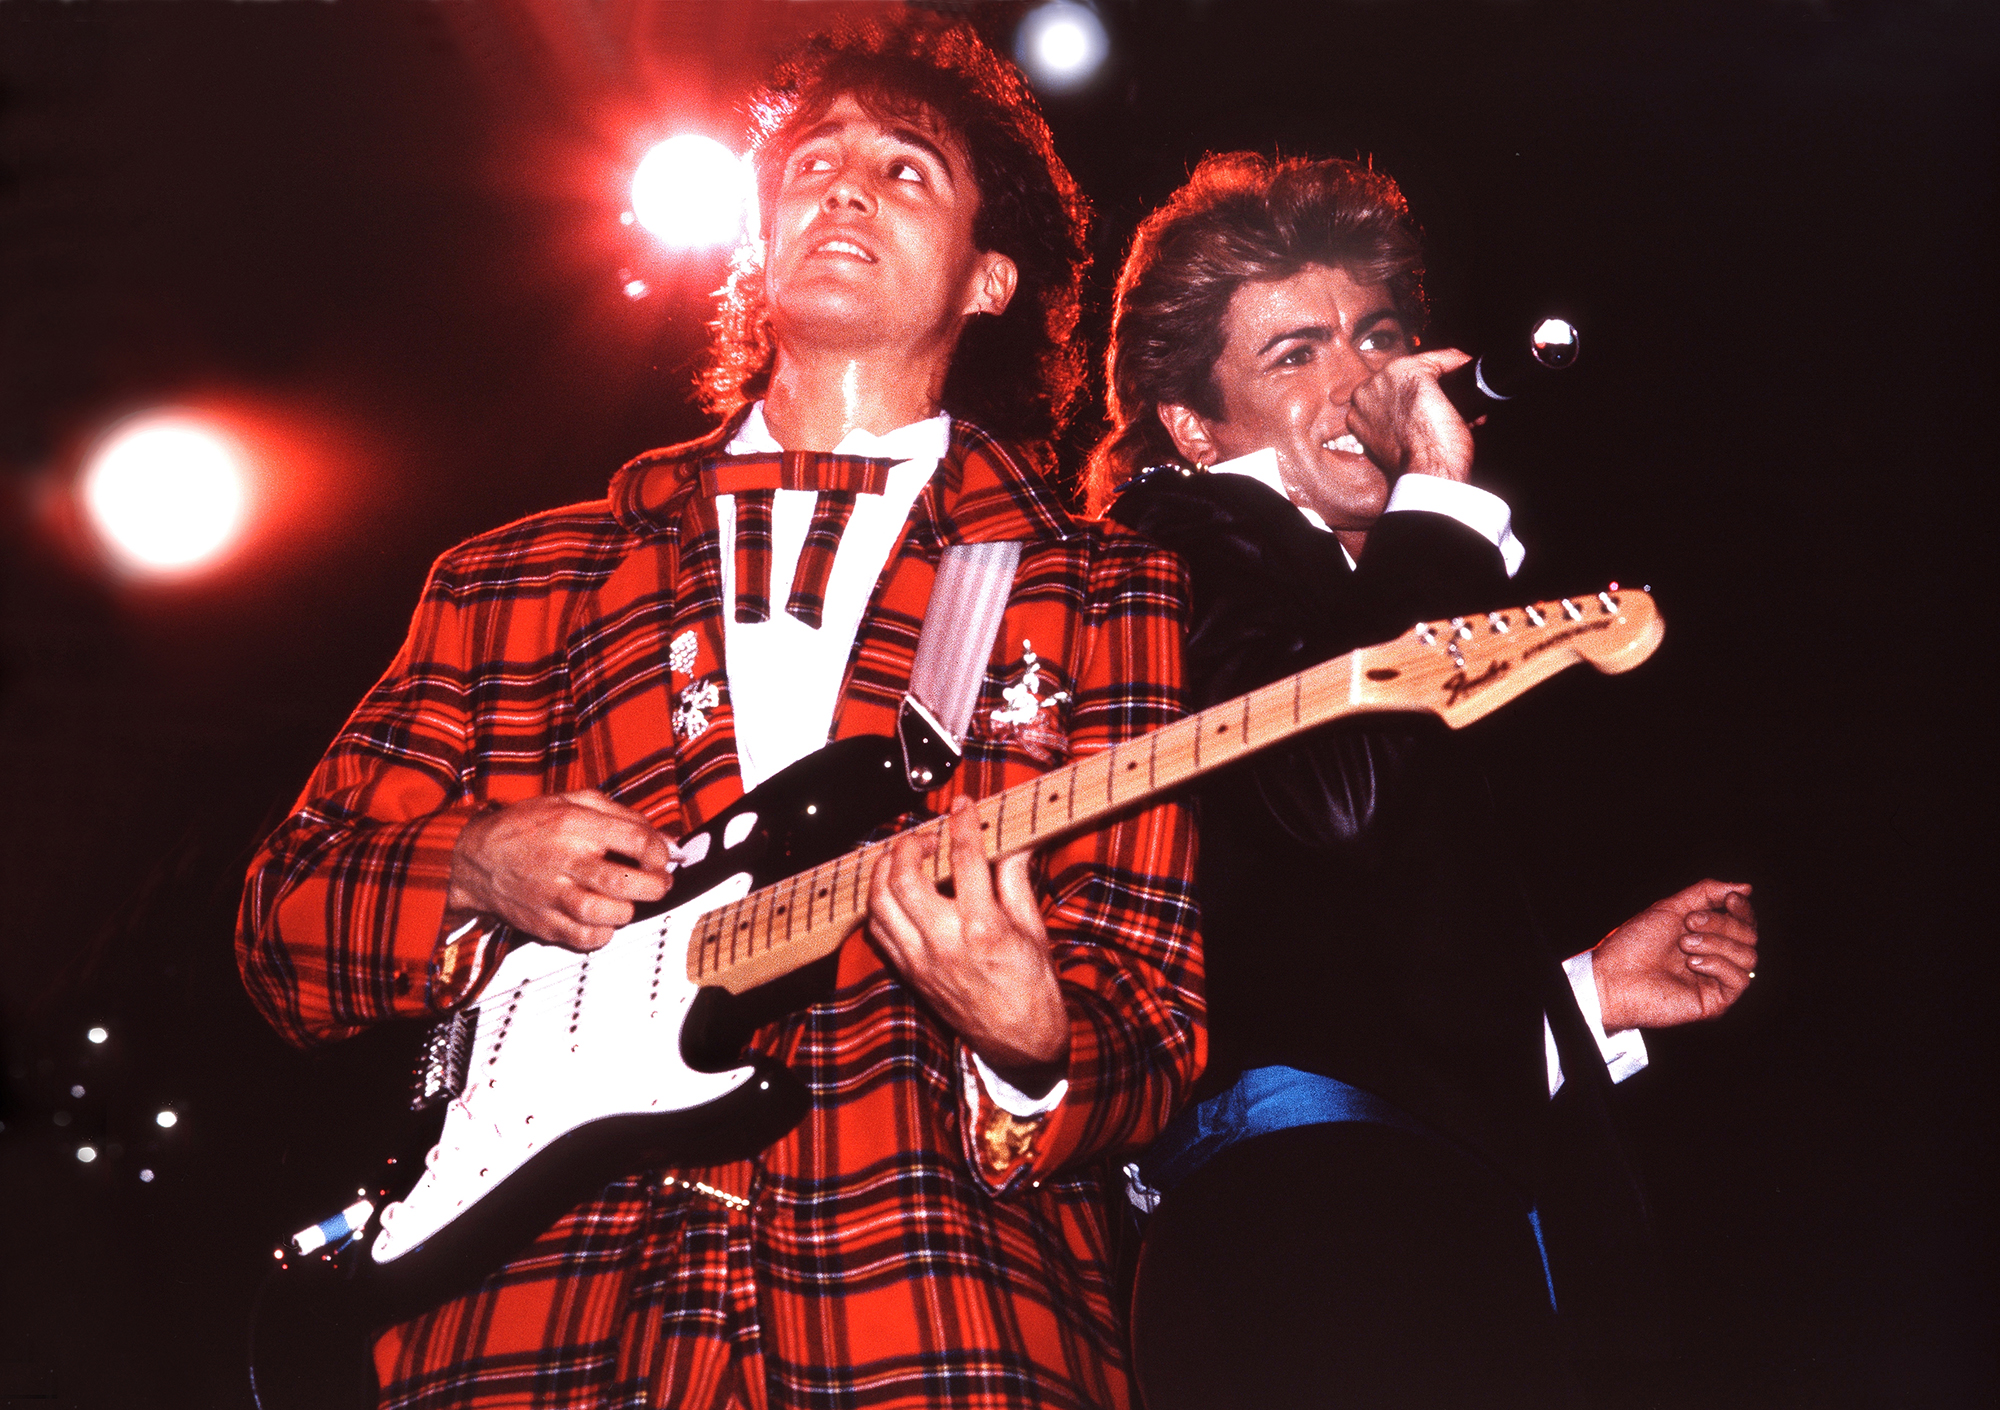 Andrew Ridgeley and George Michael of Wham! perform in London in 1984.